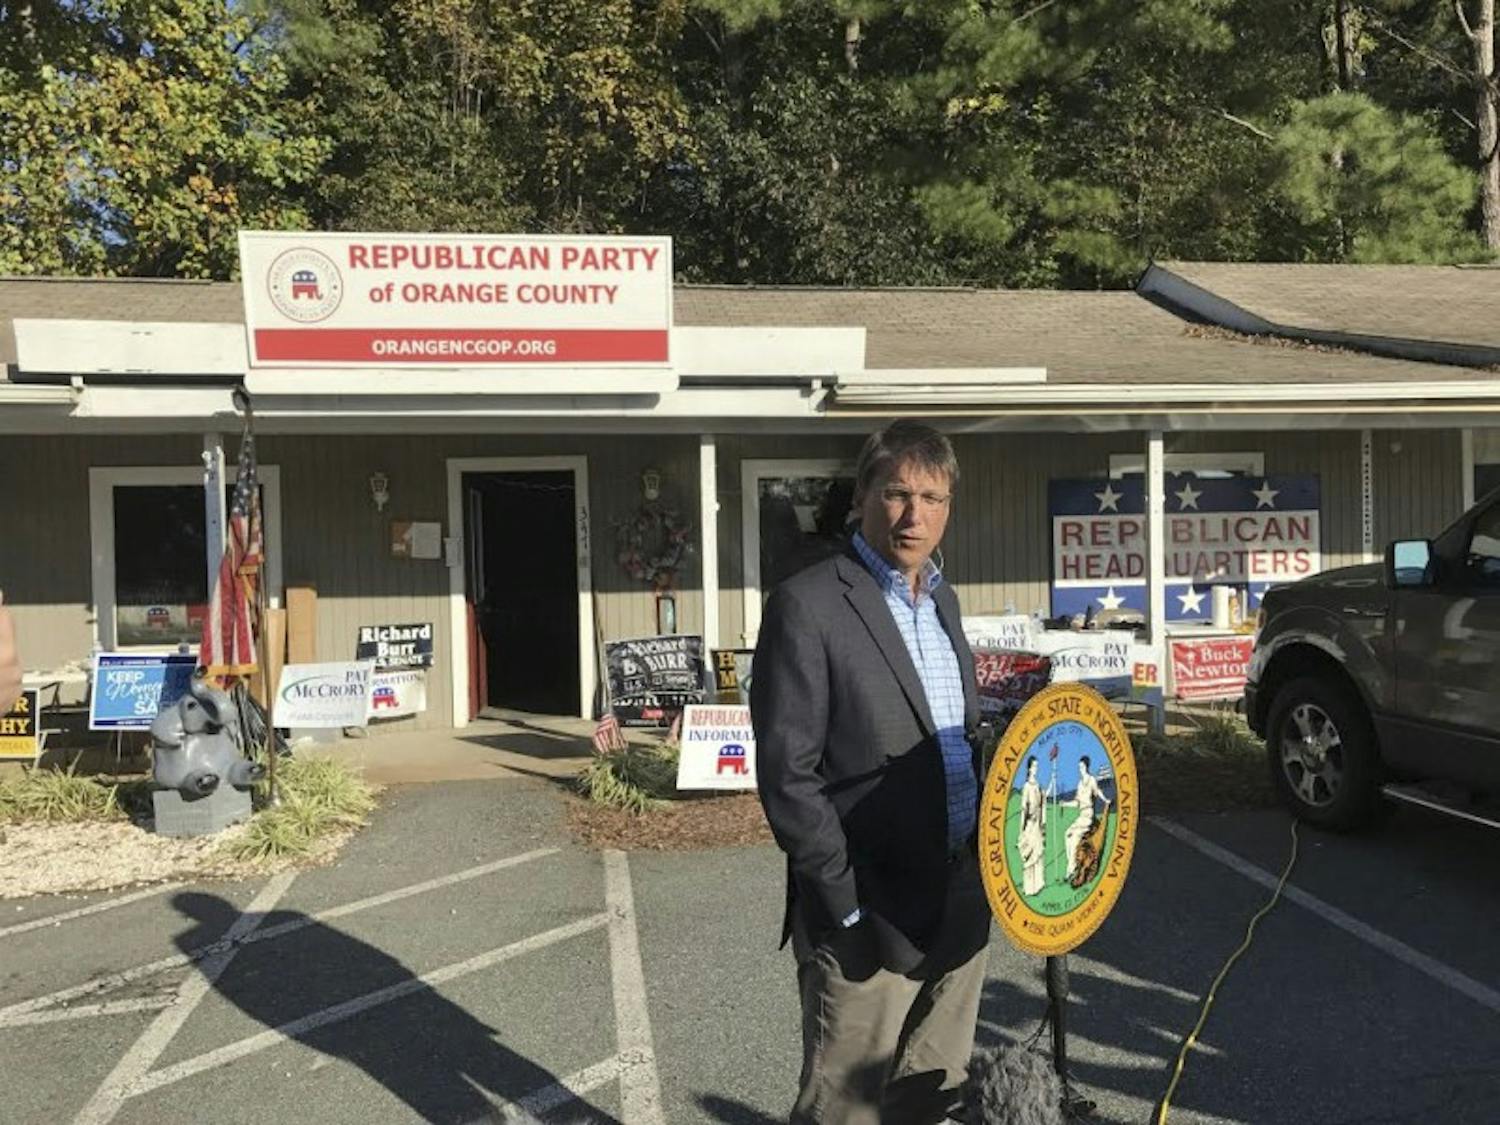 Governor Pat McCrory stands outside the Hillsborough GOP office during his campaign for re-election on October 17.